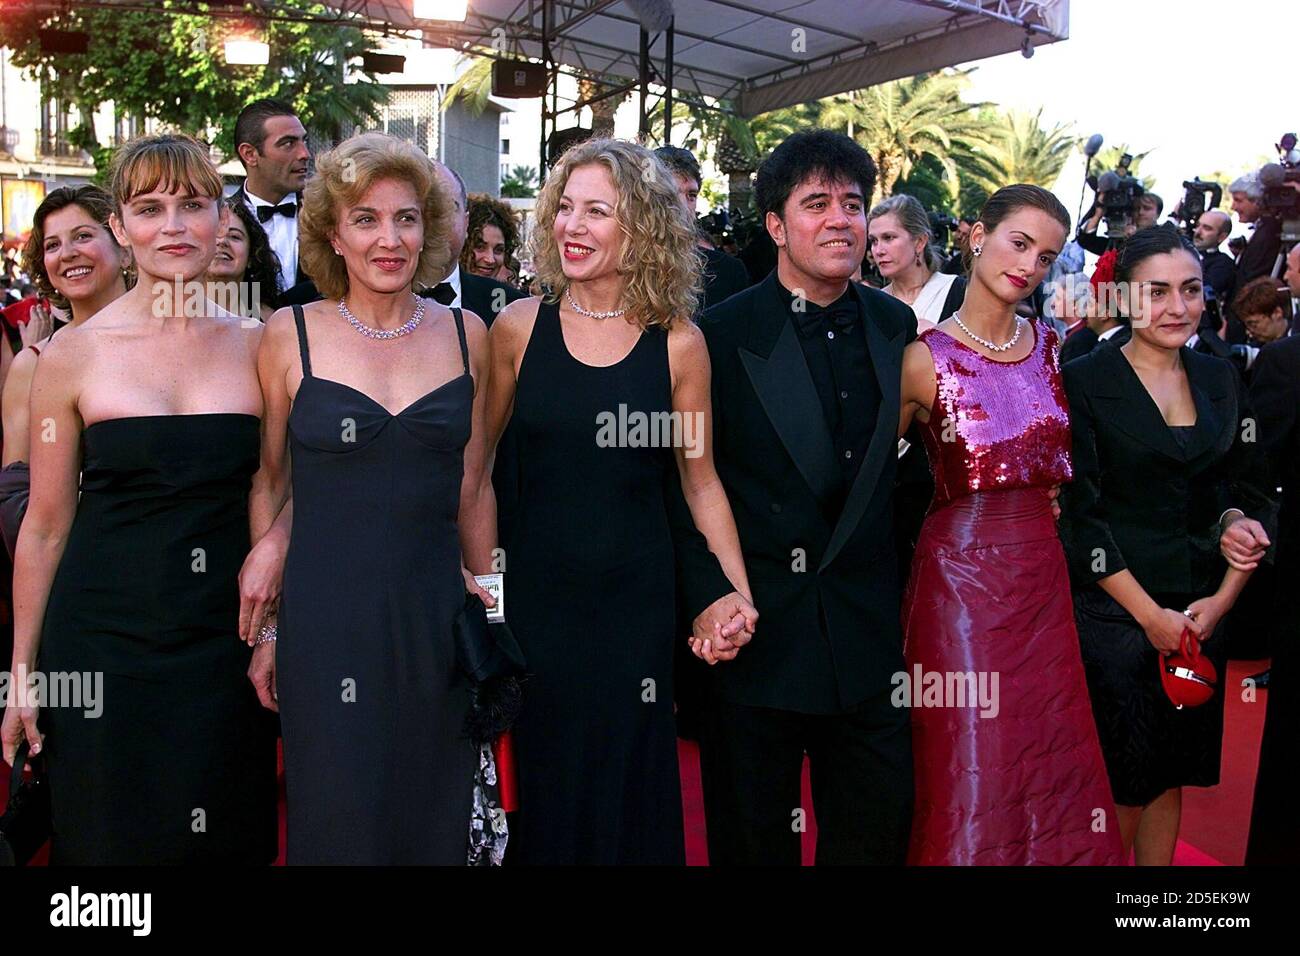 Spanish director Pedro Almodovar (2nd R) arrives with actresses from his film 'Todo Sobre Mi Madre' for the official screening at the 52nd Cannes Film Festival May 15. From L-R: Antonia San Juan, Marisa Paredes, Cecilia Roth, Almodovar, Penelope Cruz, and Candela Pena.   ??» Stock Photo